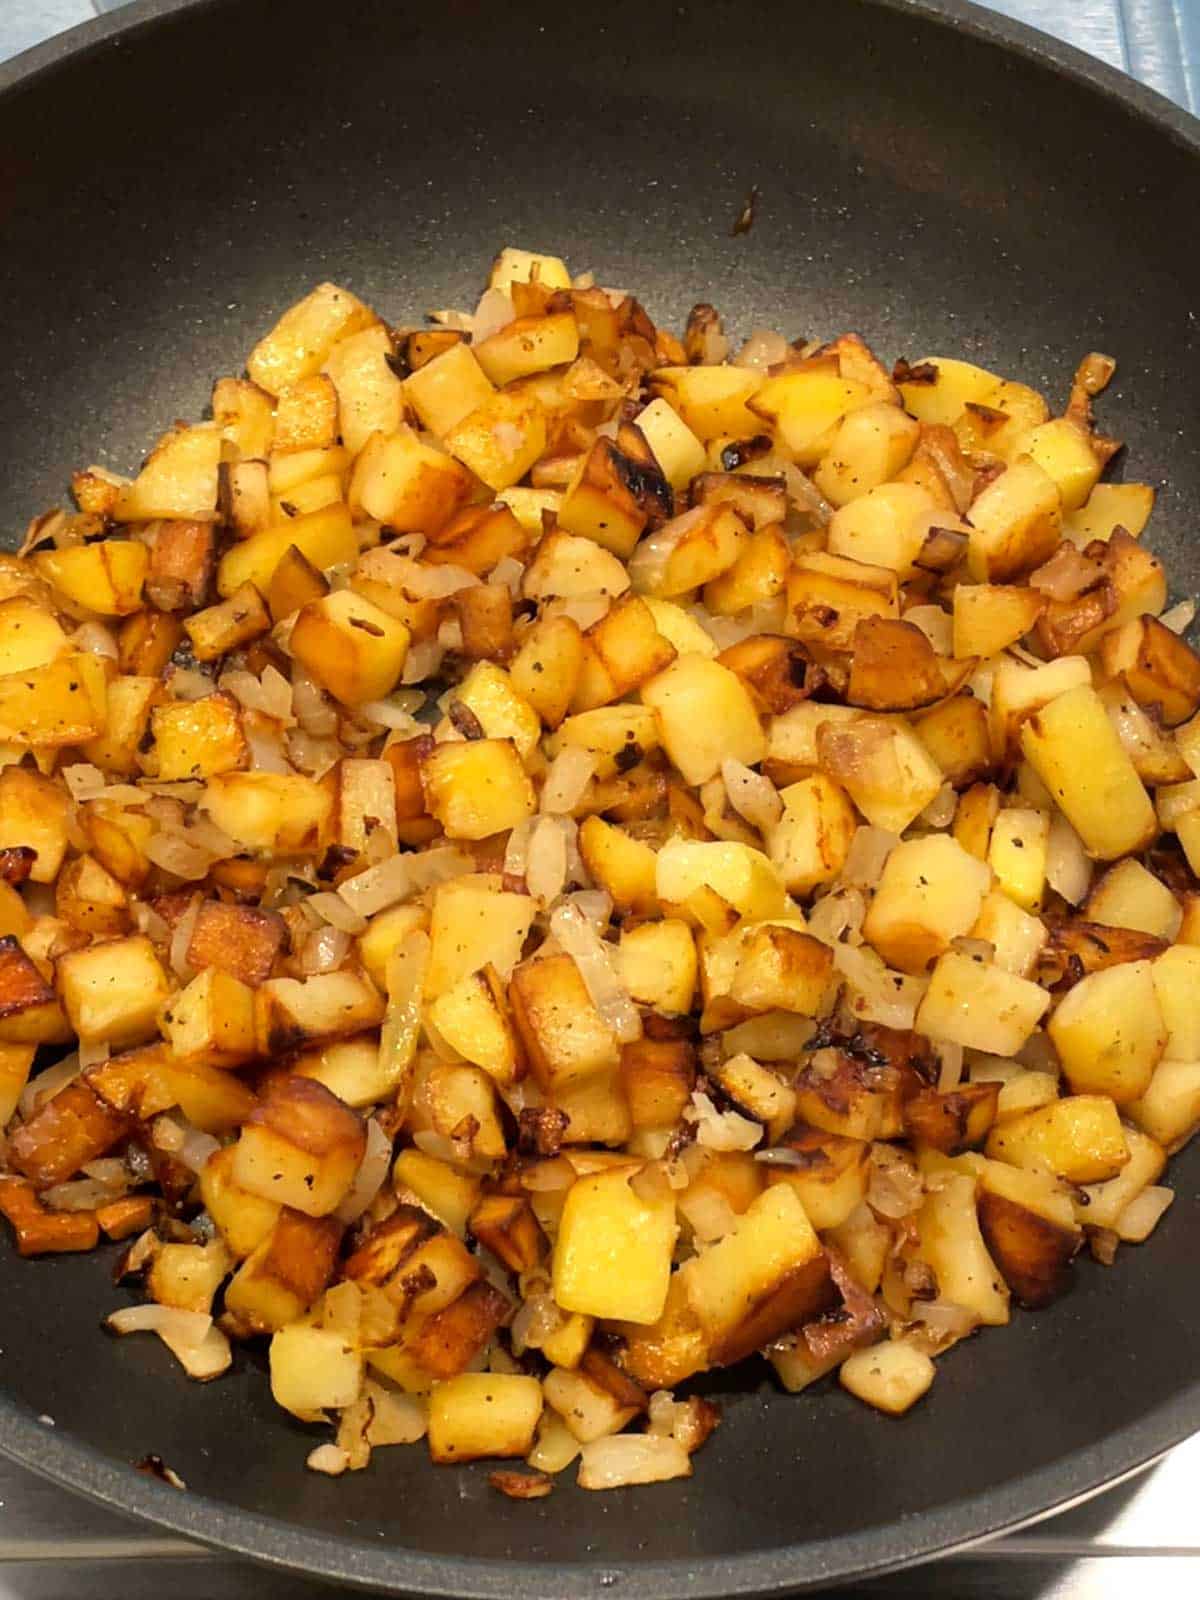 Potatoes and Onions cooked together in skillet.